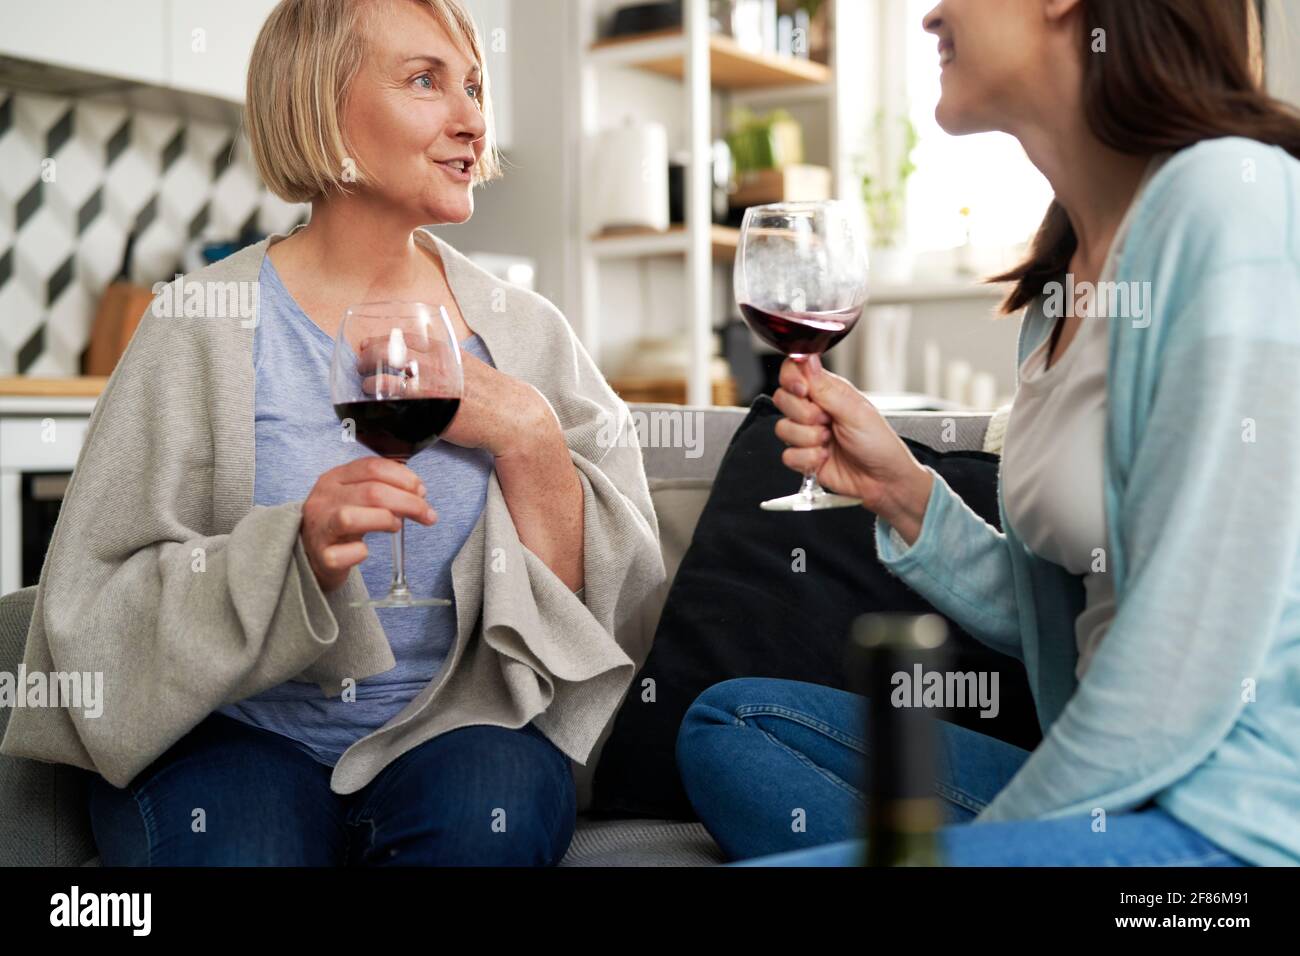 Two generation women drinking wine at home Stock Photo